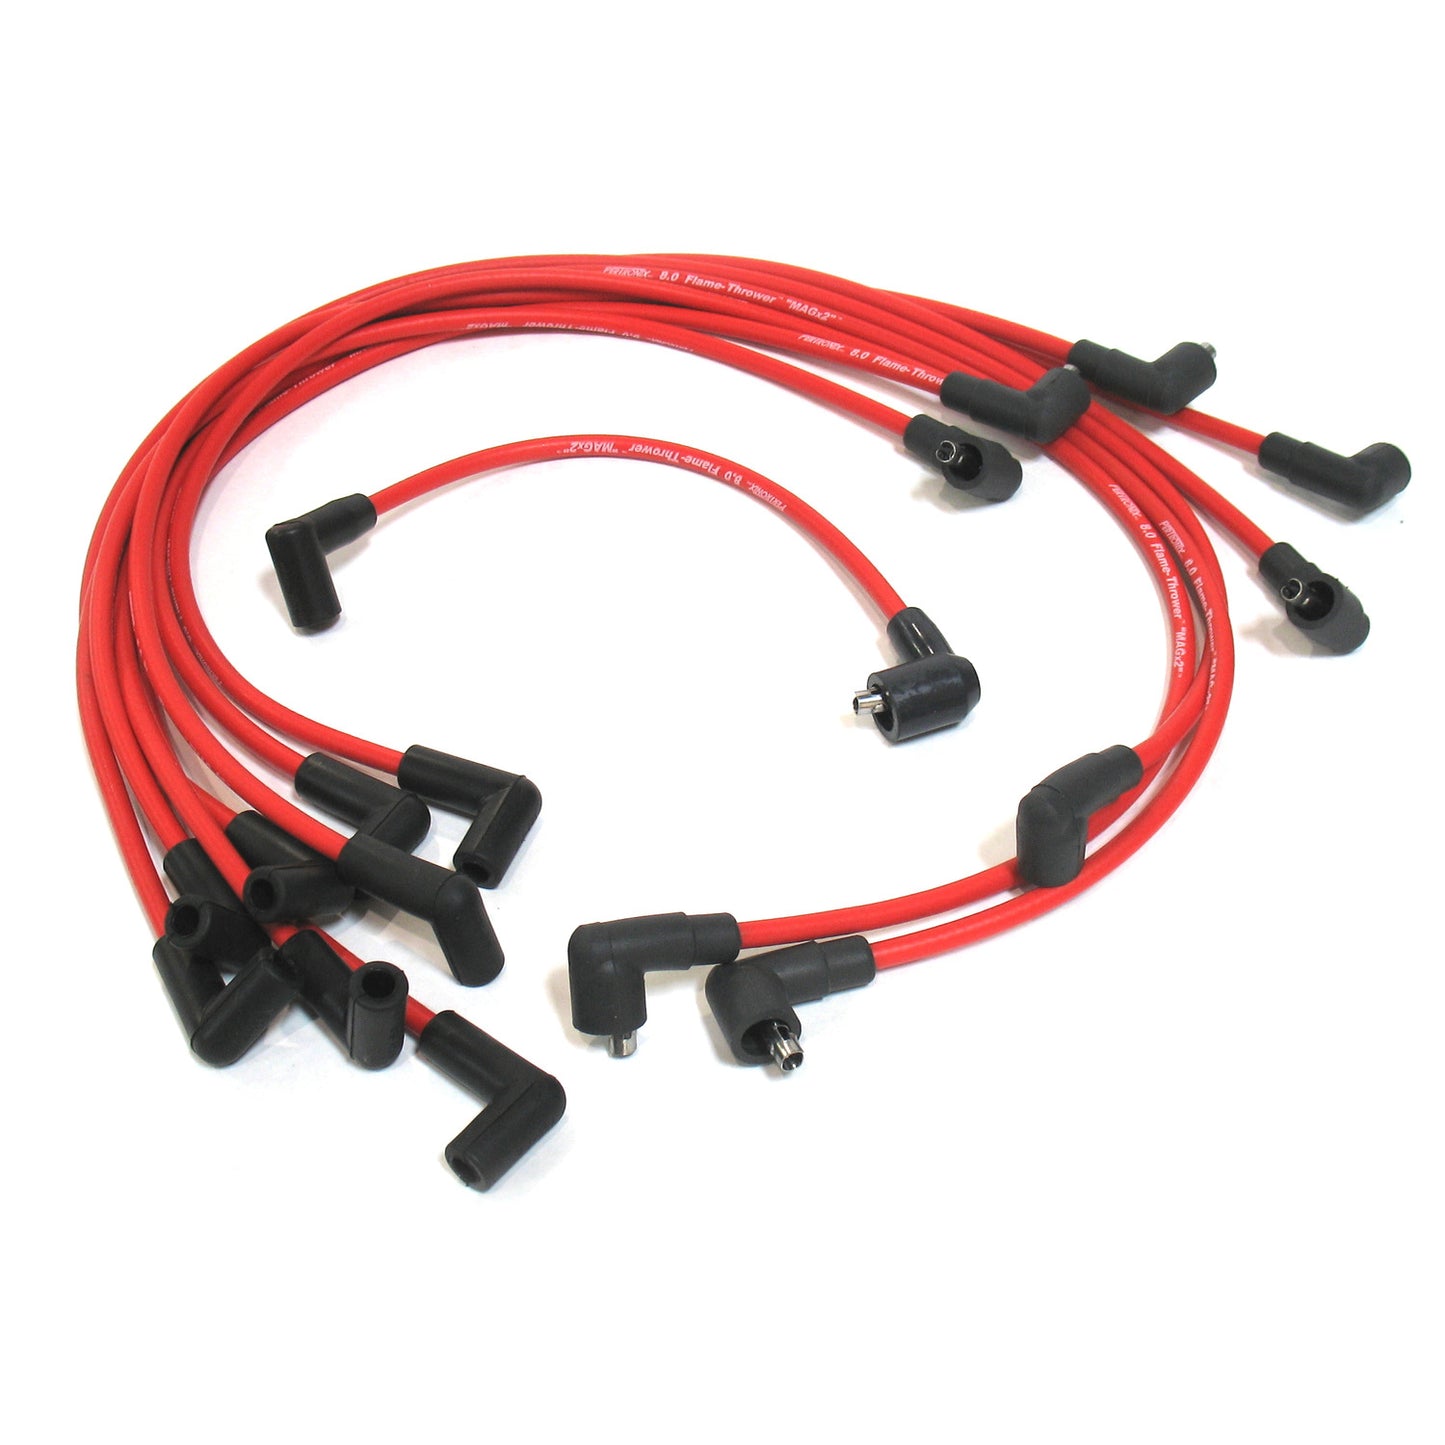 PerTronix 808450 Flame-Thrower Spark Plug Wires 8 cyl 8mm Chevrolet Ma –  Pertronix